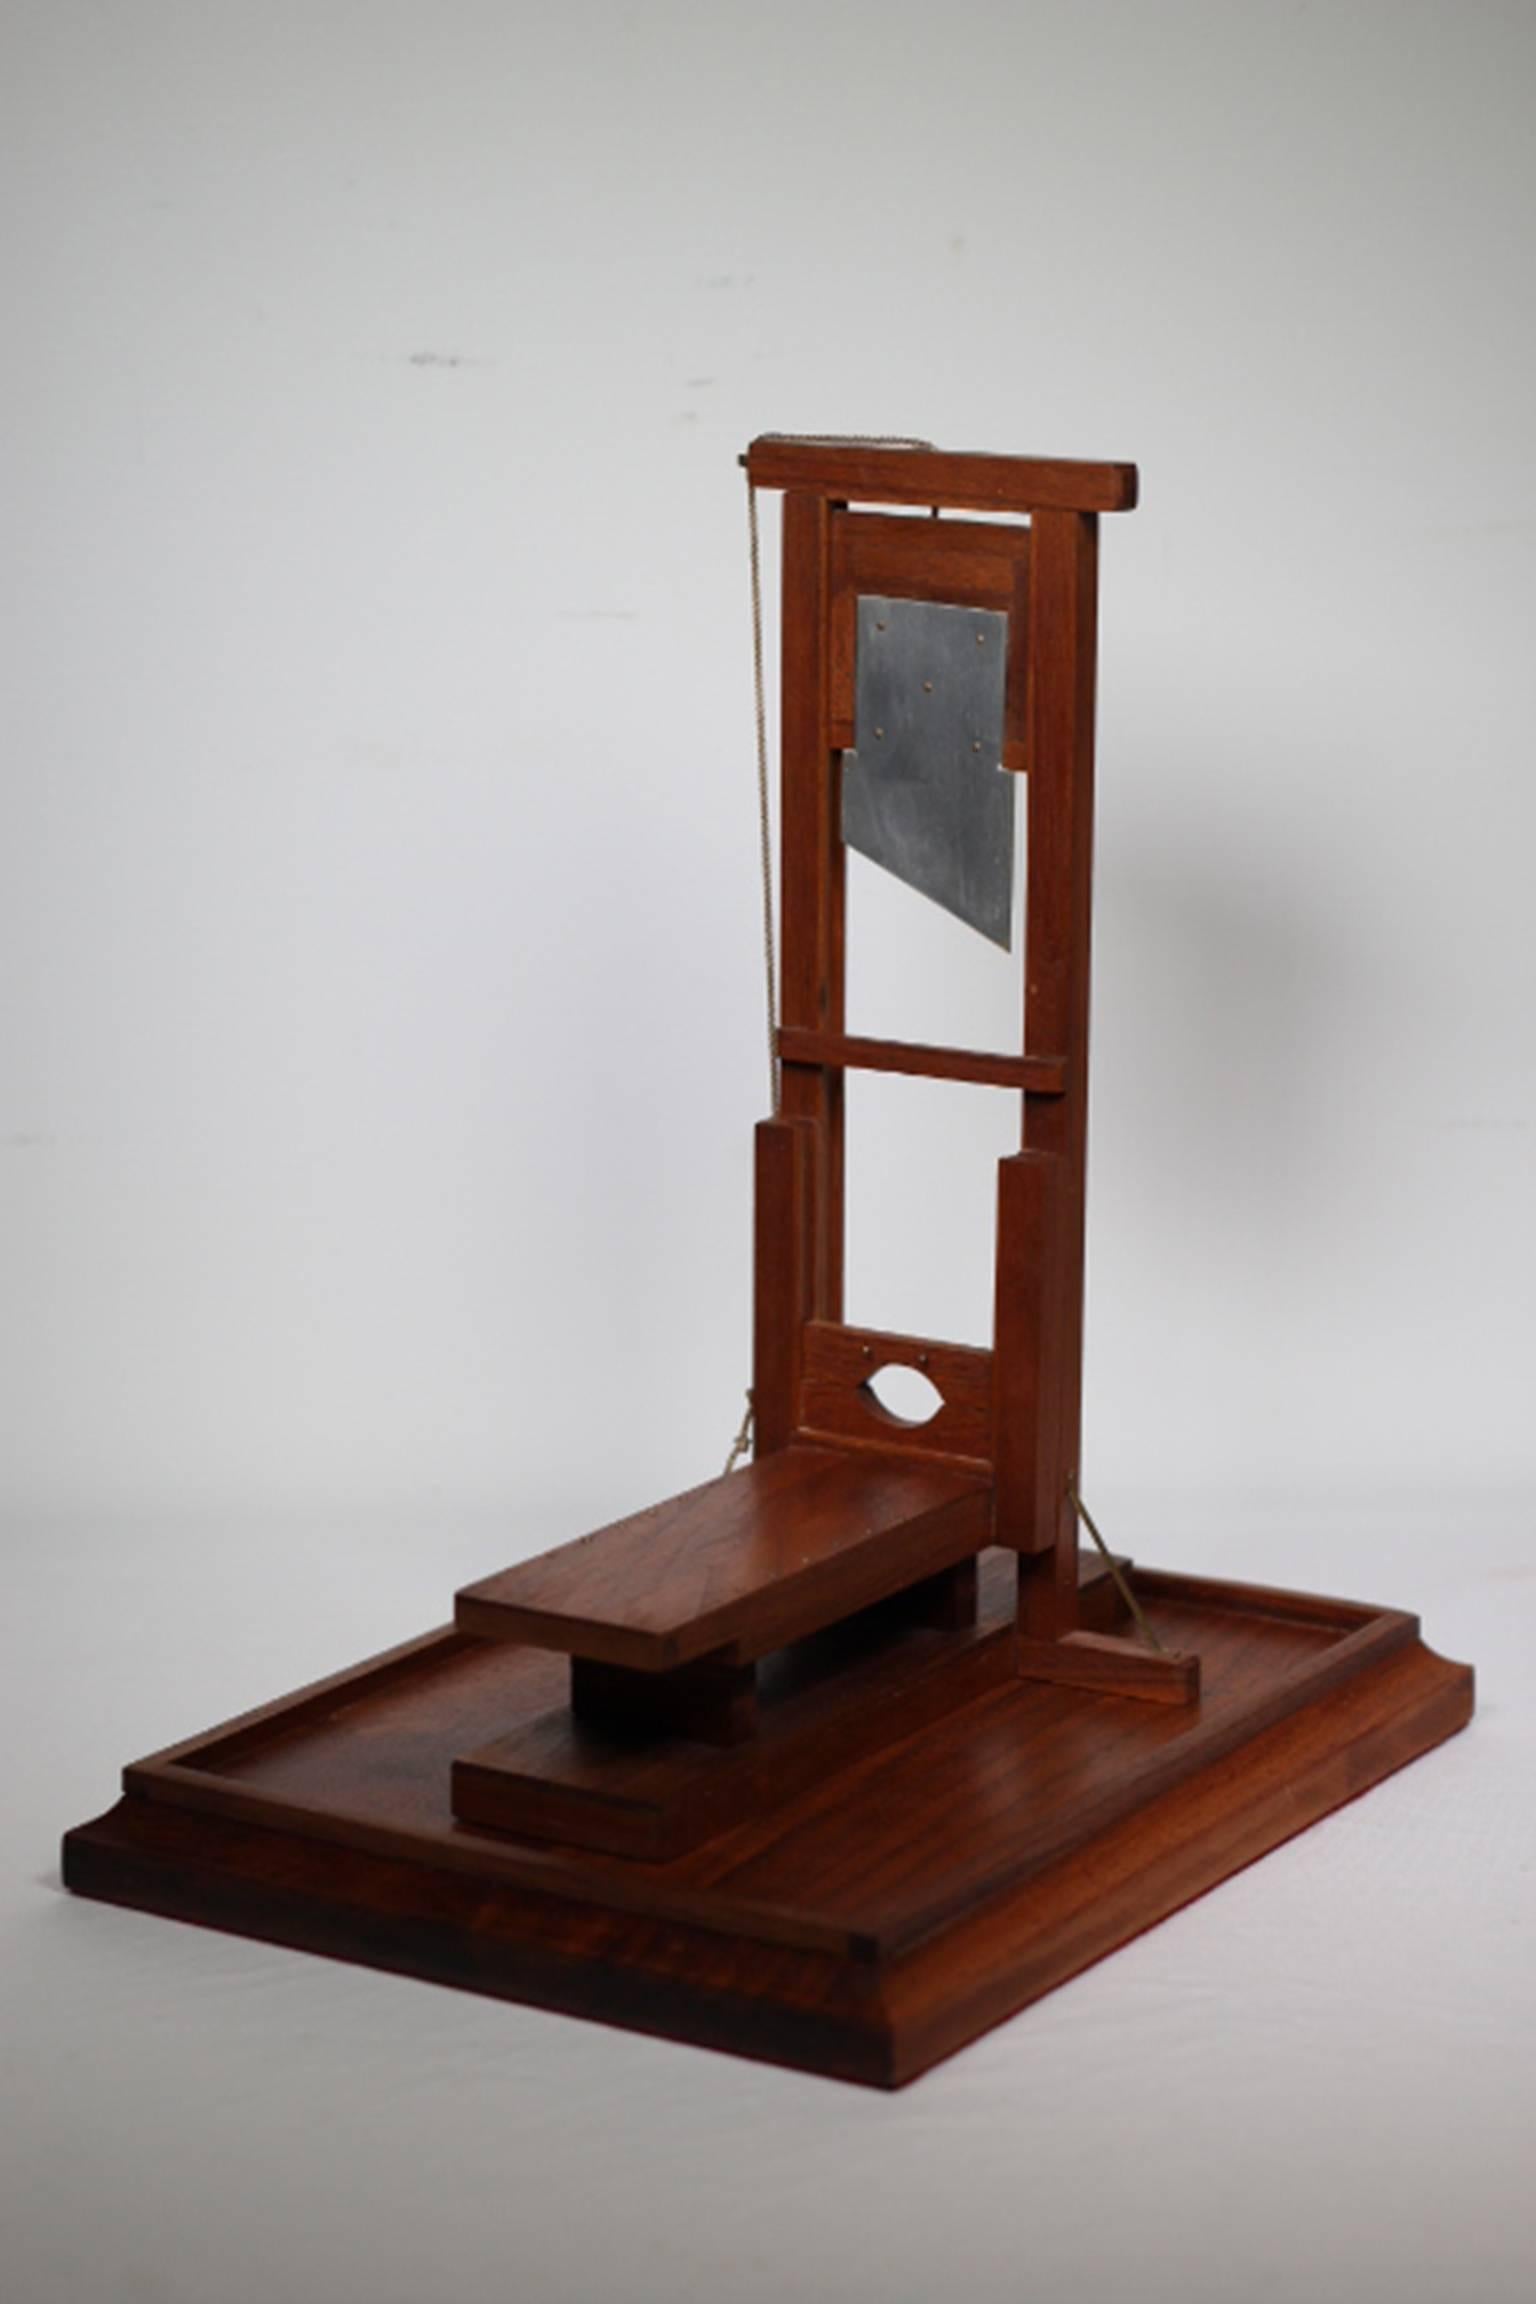 Fully functioning gallows and guillotine models handmade by a San Quentin prisoner in the 1980s. Signed and dated with the artist's prison number.

Two trap doors on the gallows are released by pulling the coresponding string and the "waiting